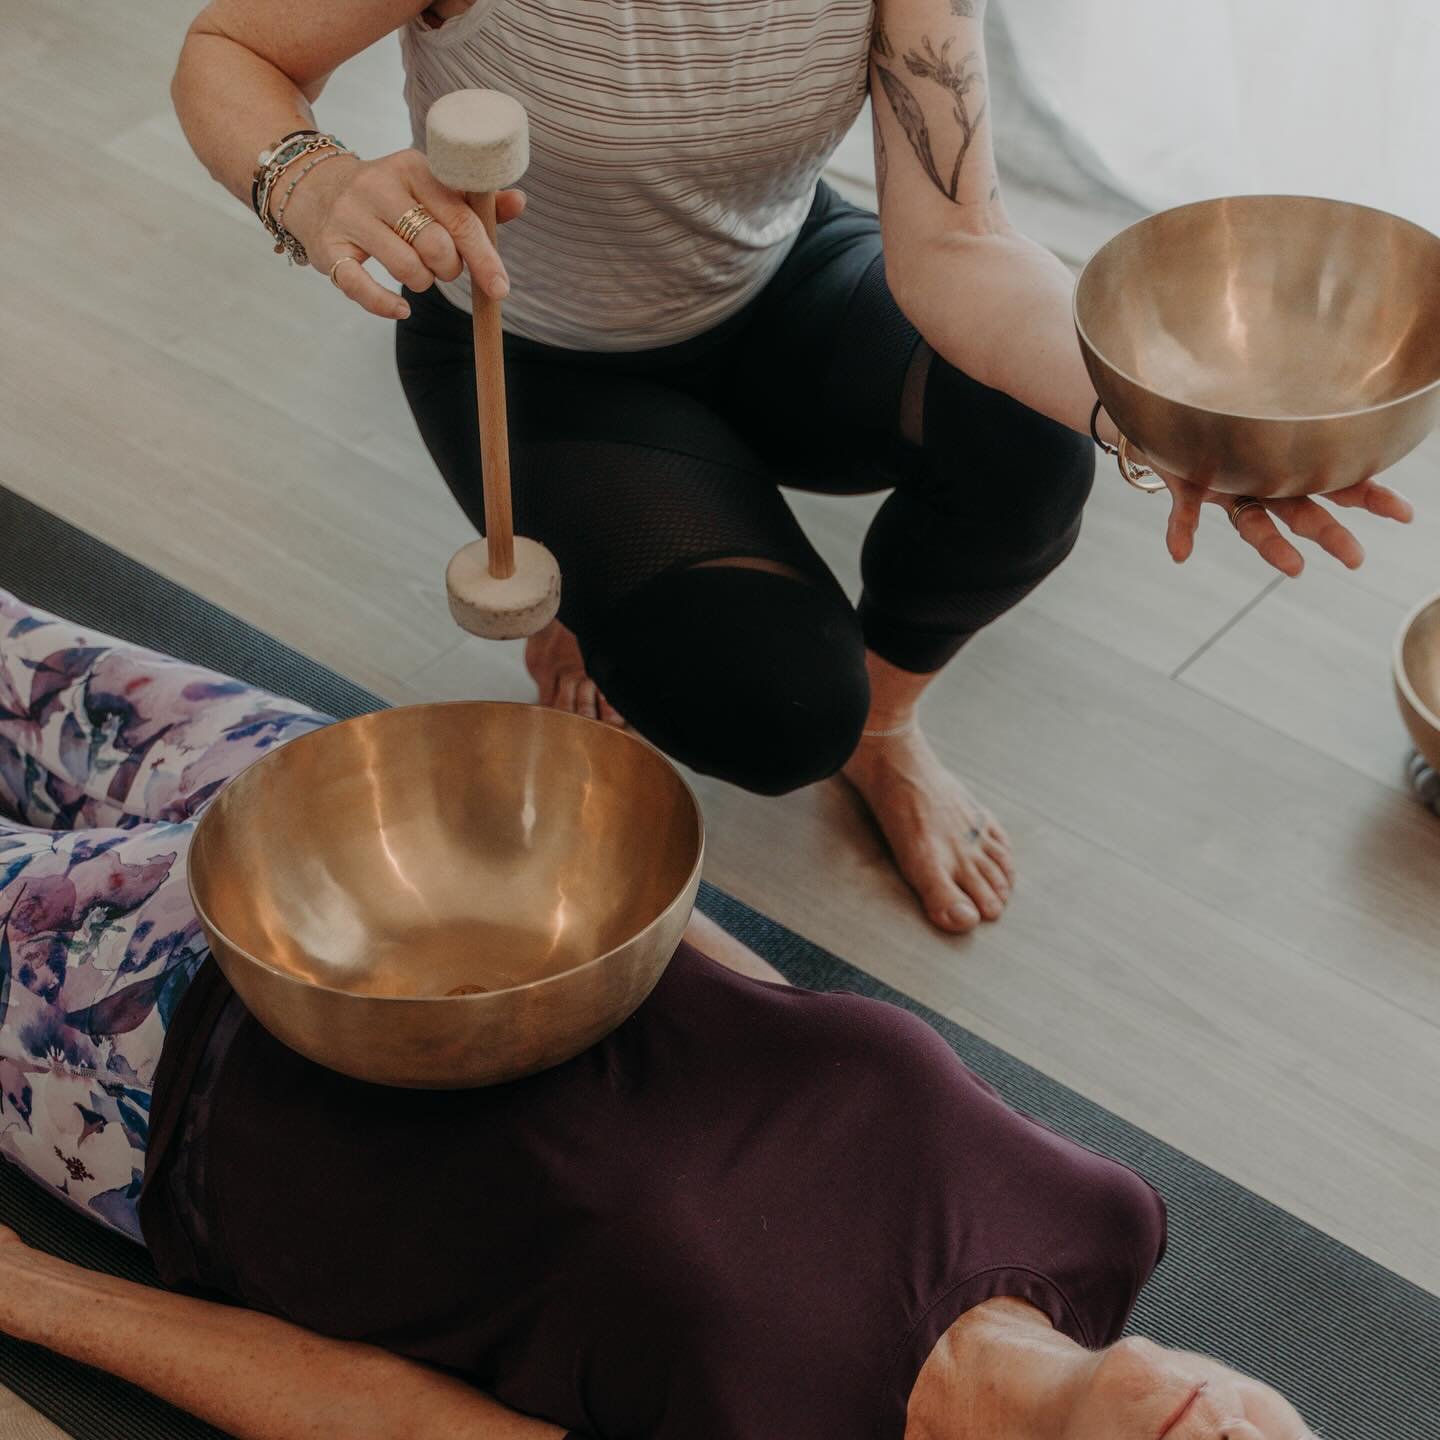 Just around the corner is our monthly 🙏 RESTORATIVE YOGA &amp; SOUND BATH JOURNEY 🙏 with the kind and compassionate Eve Hill - @breatheveyoga. 

She&rsquo;ll be taking over the Shala next Friday evening to send you into a deep state of zen via her 